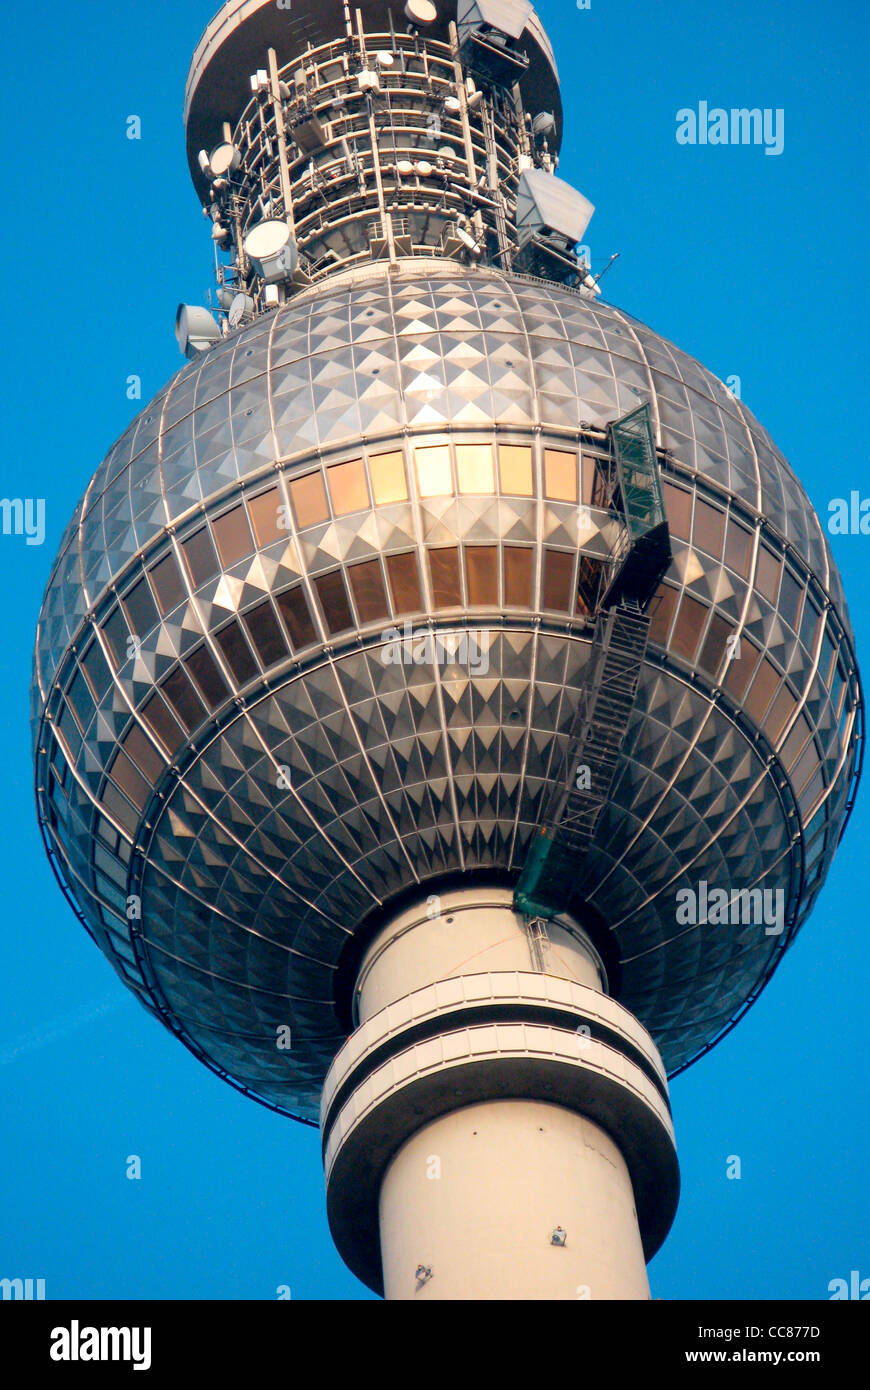 Television tower at the Alexanderplatz in Berlin. Stock Photo